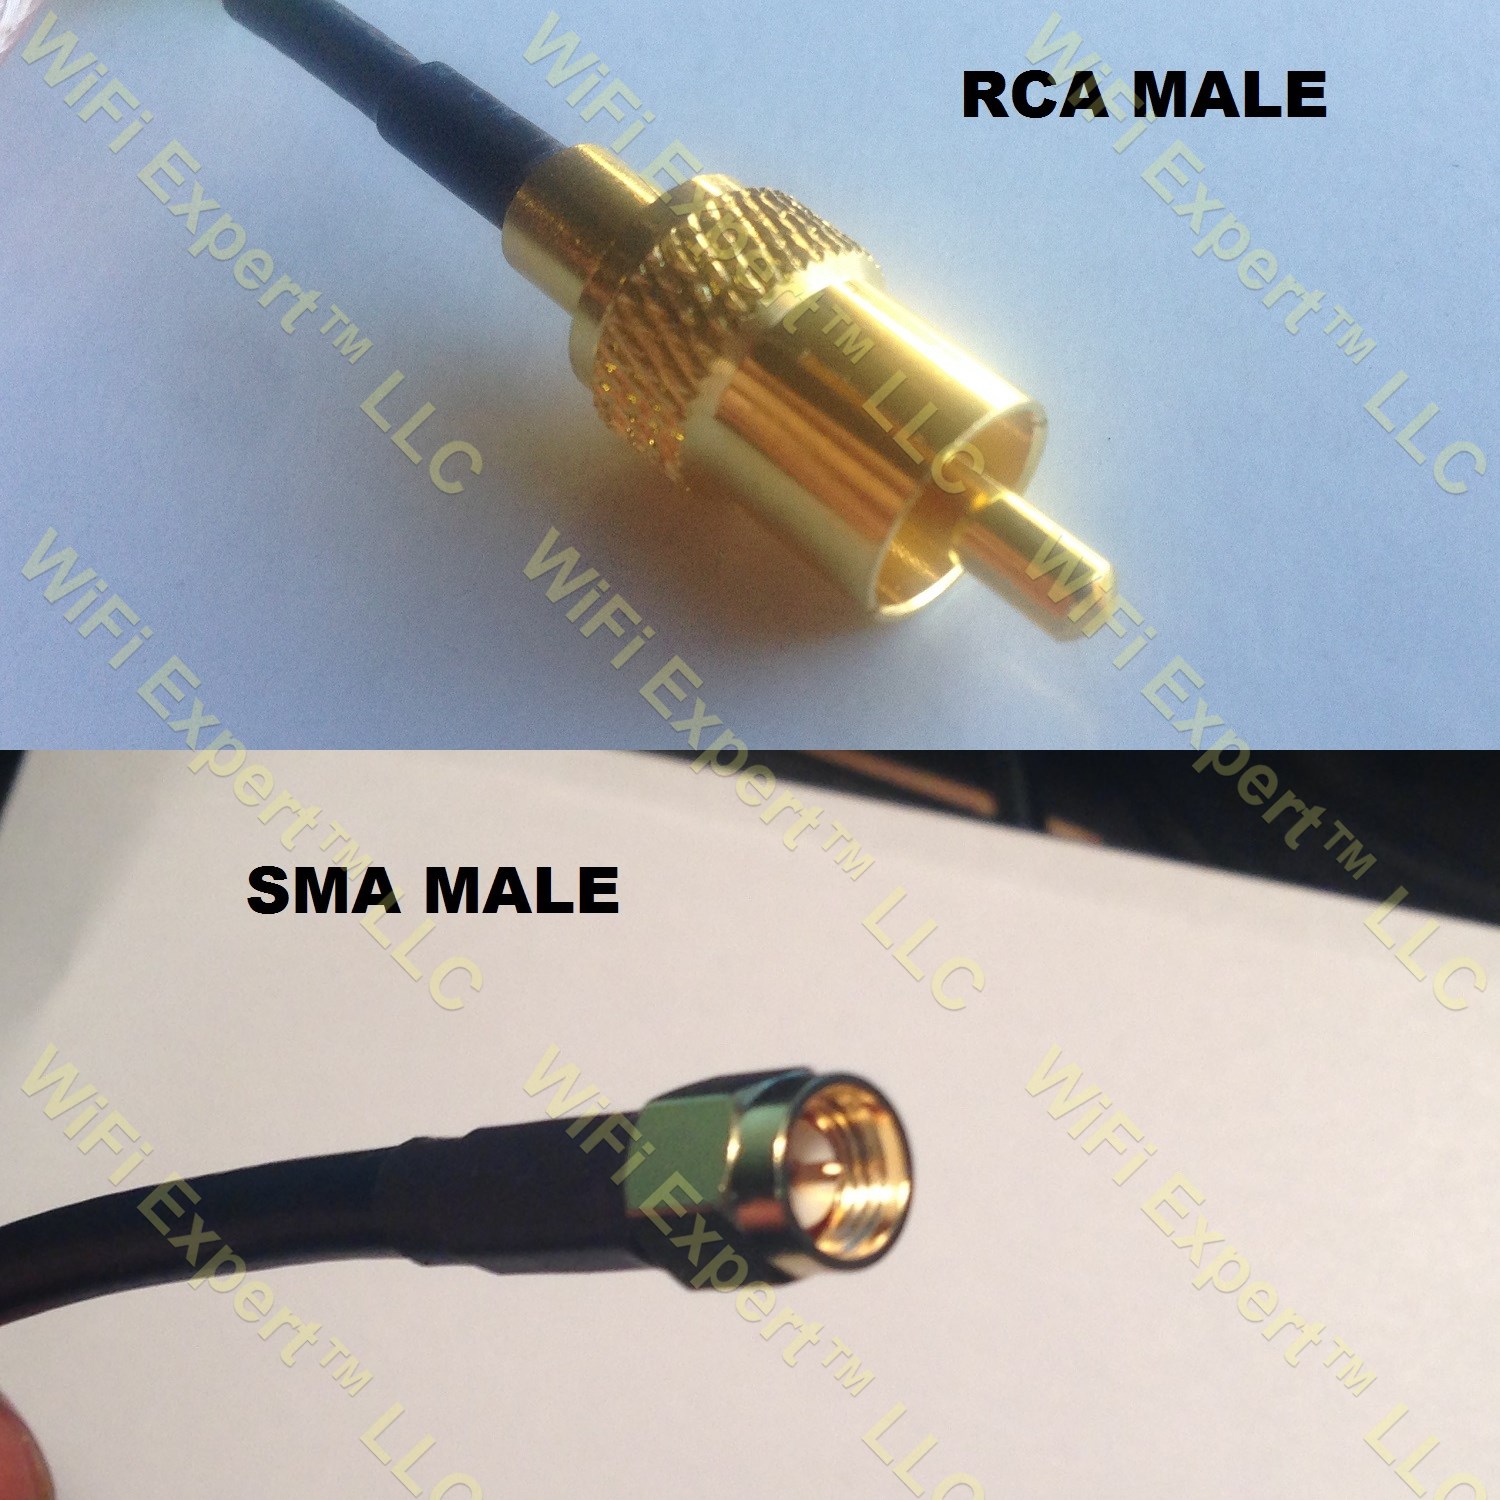 USA-CA RG188  RCA MALE to MINI UHF MALE Coaxial RF Pigtail Cable 